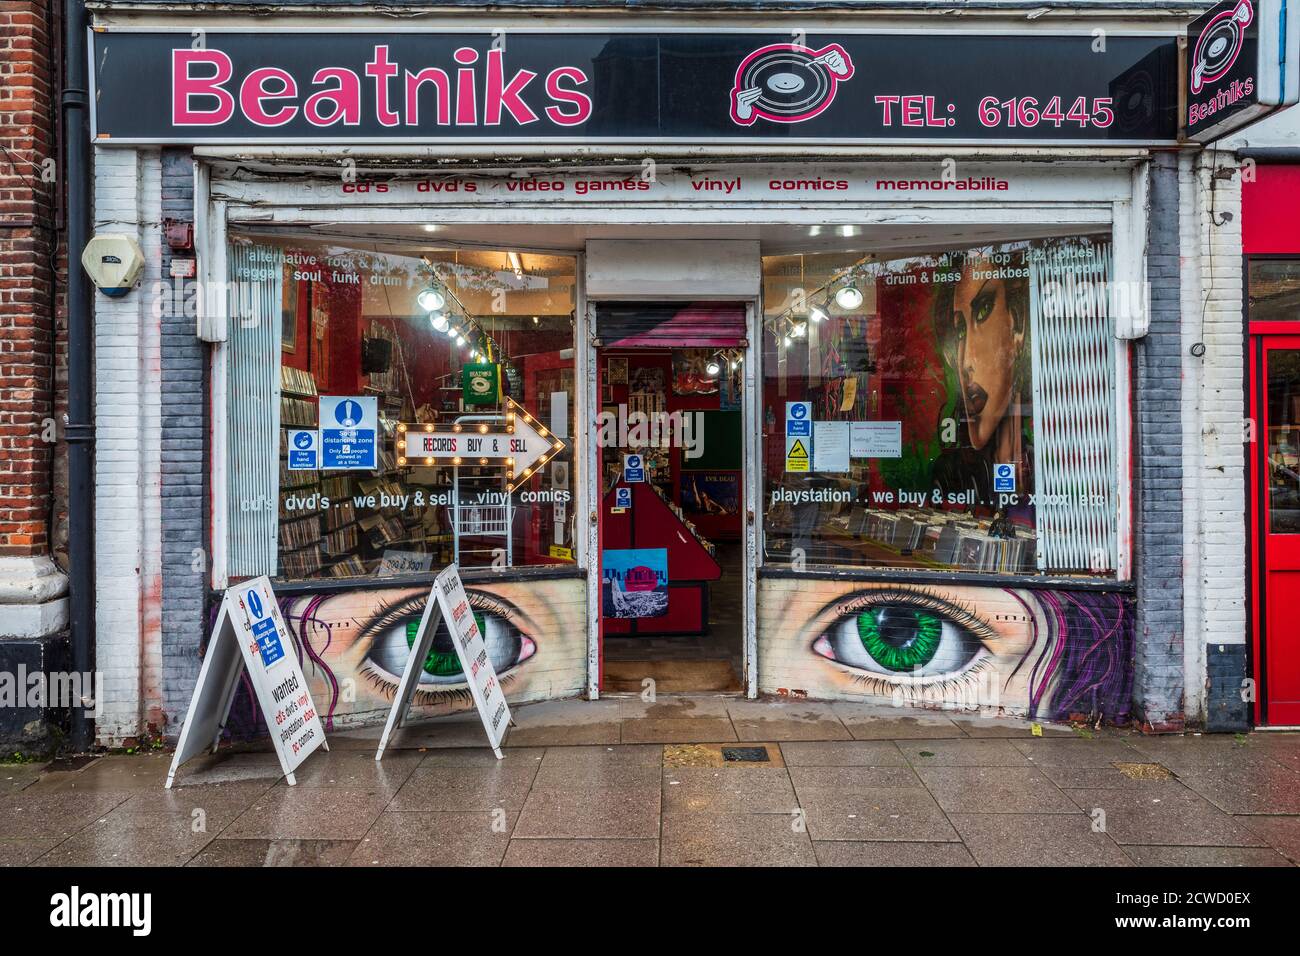 Beatniks Record Shop Norwich - Independent second hand records, games and film shop on Magdalen Street Norwich, founded 2000. Independent Record Store. Stock Photo